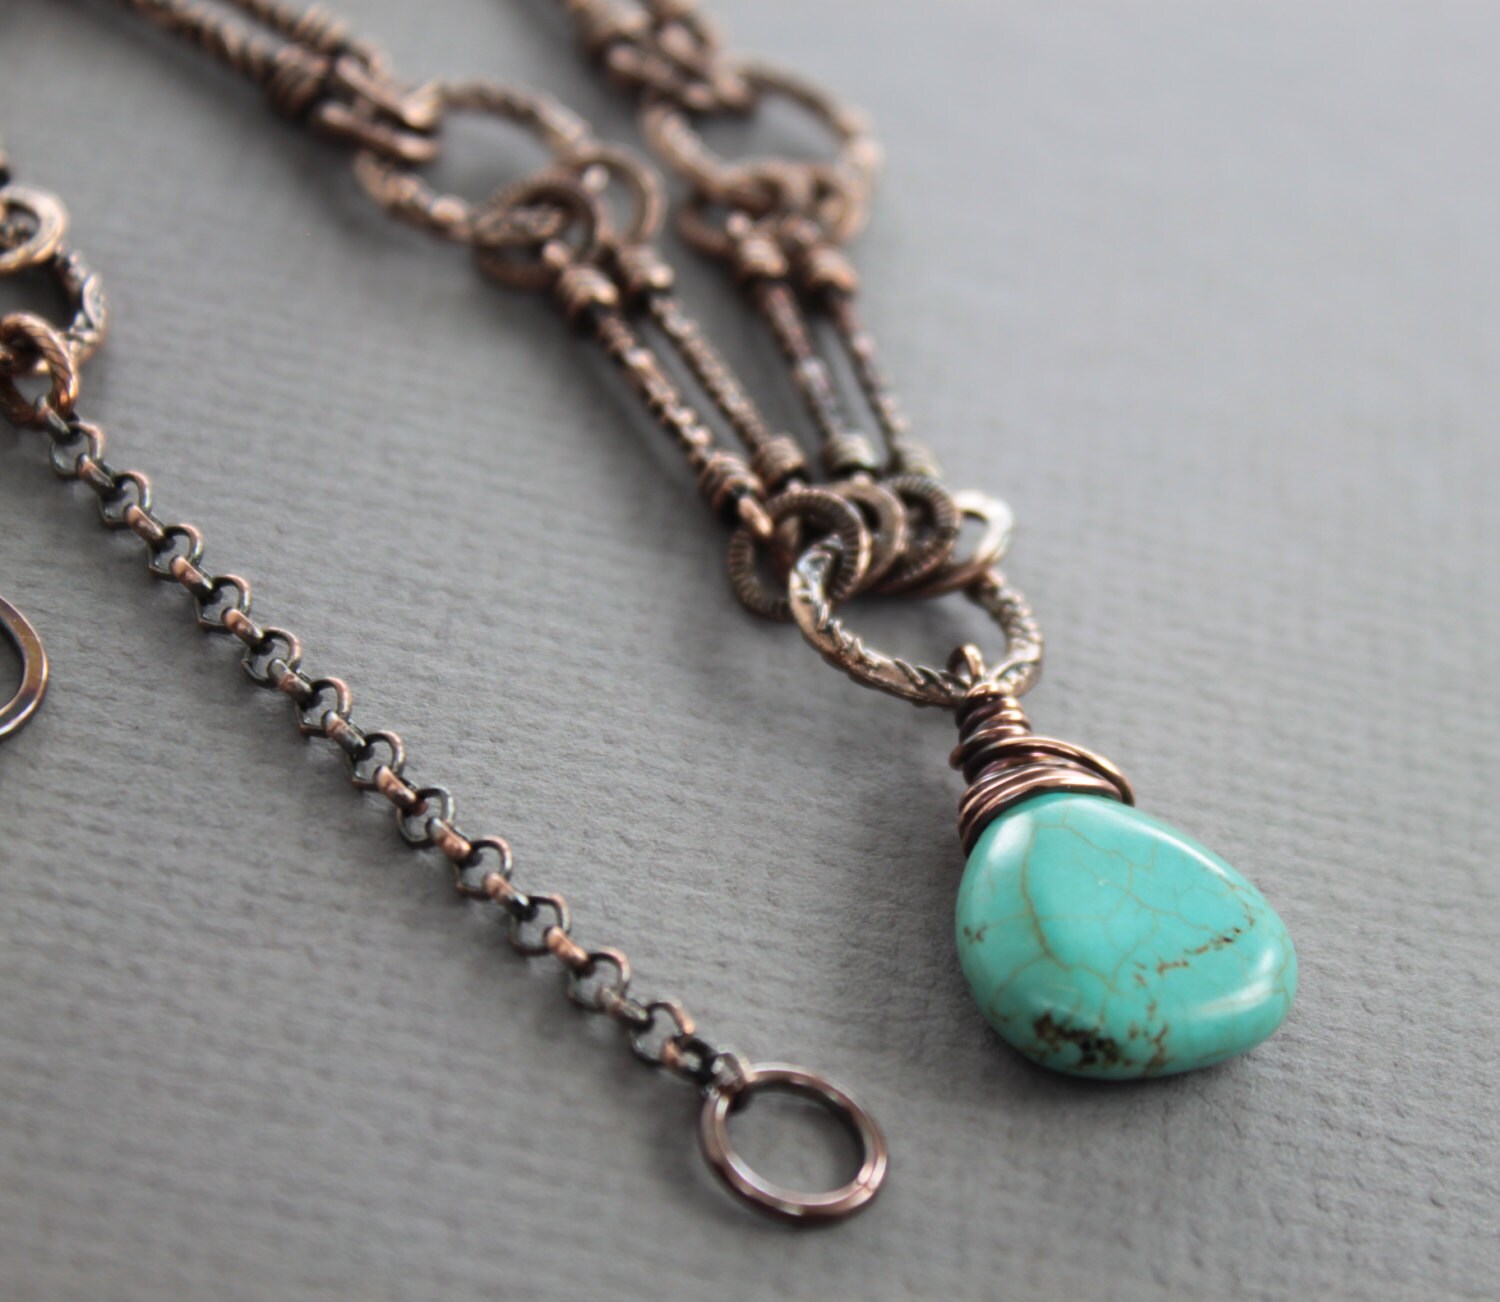 Vintage style copper necklace with howlite turquoise briolette